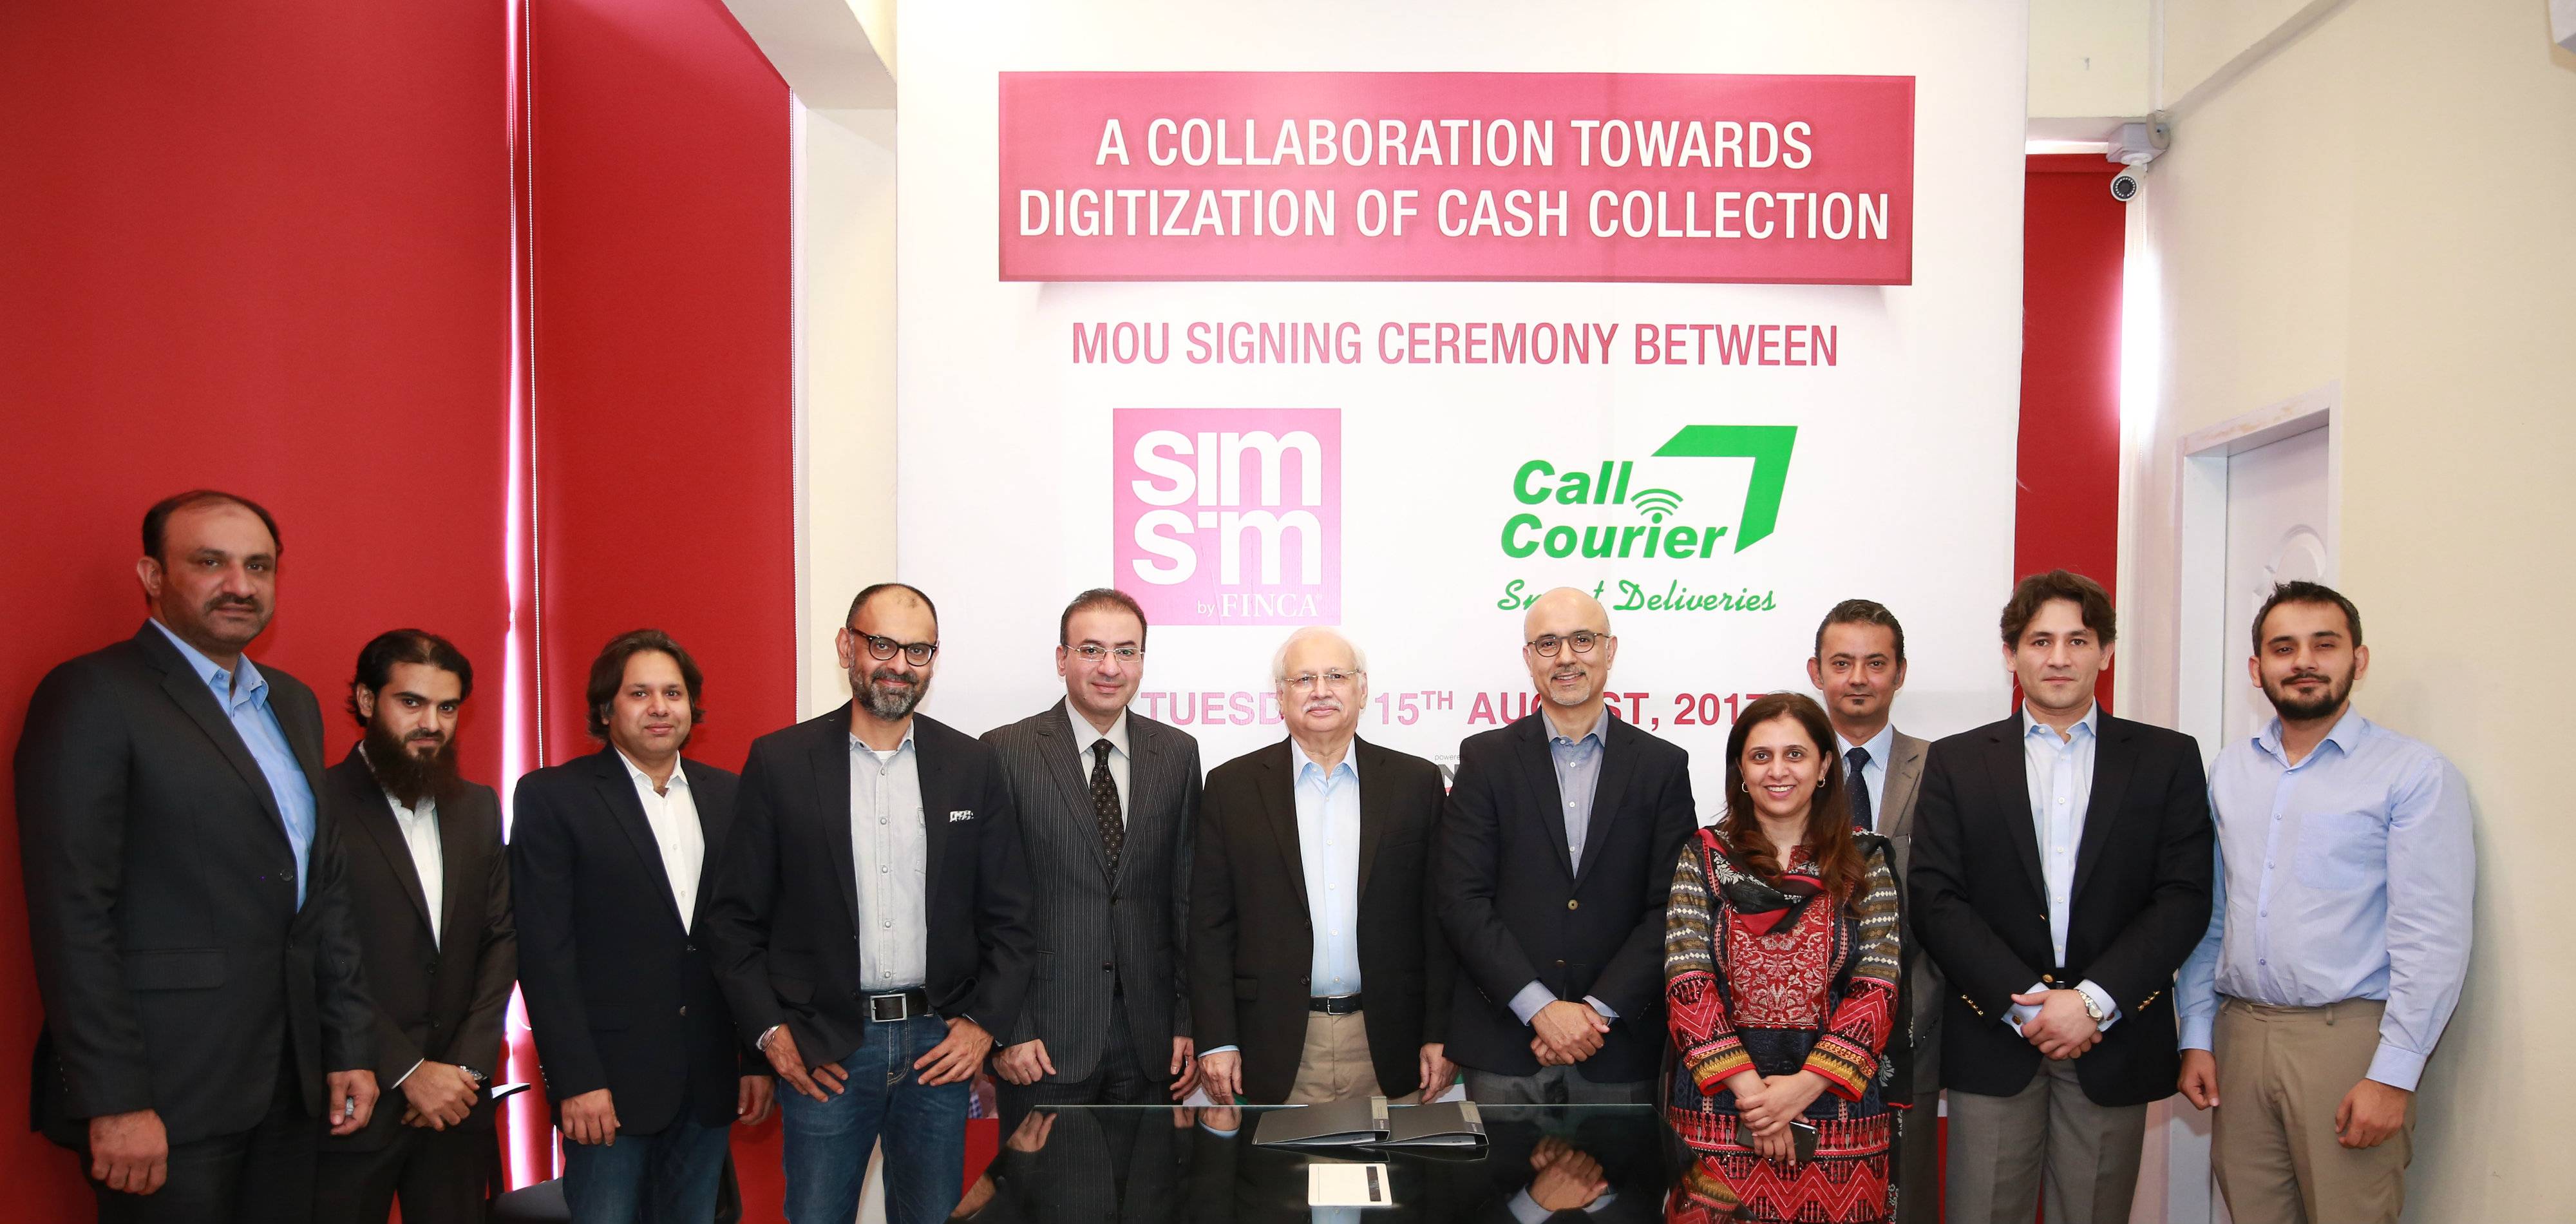 FINCA enters into a strategic partnership with CallCourier for digital cash collection